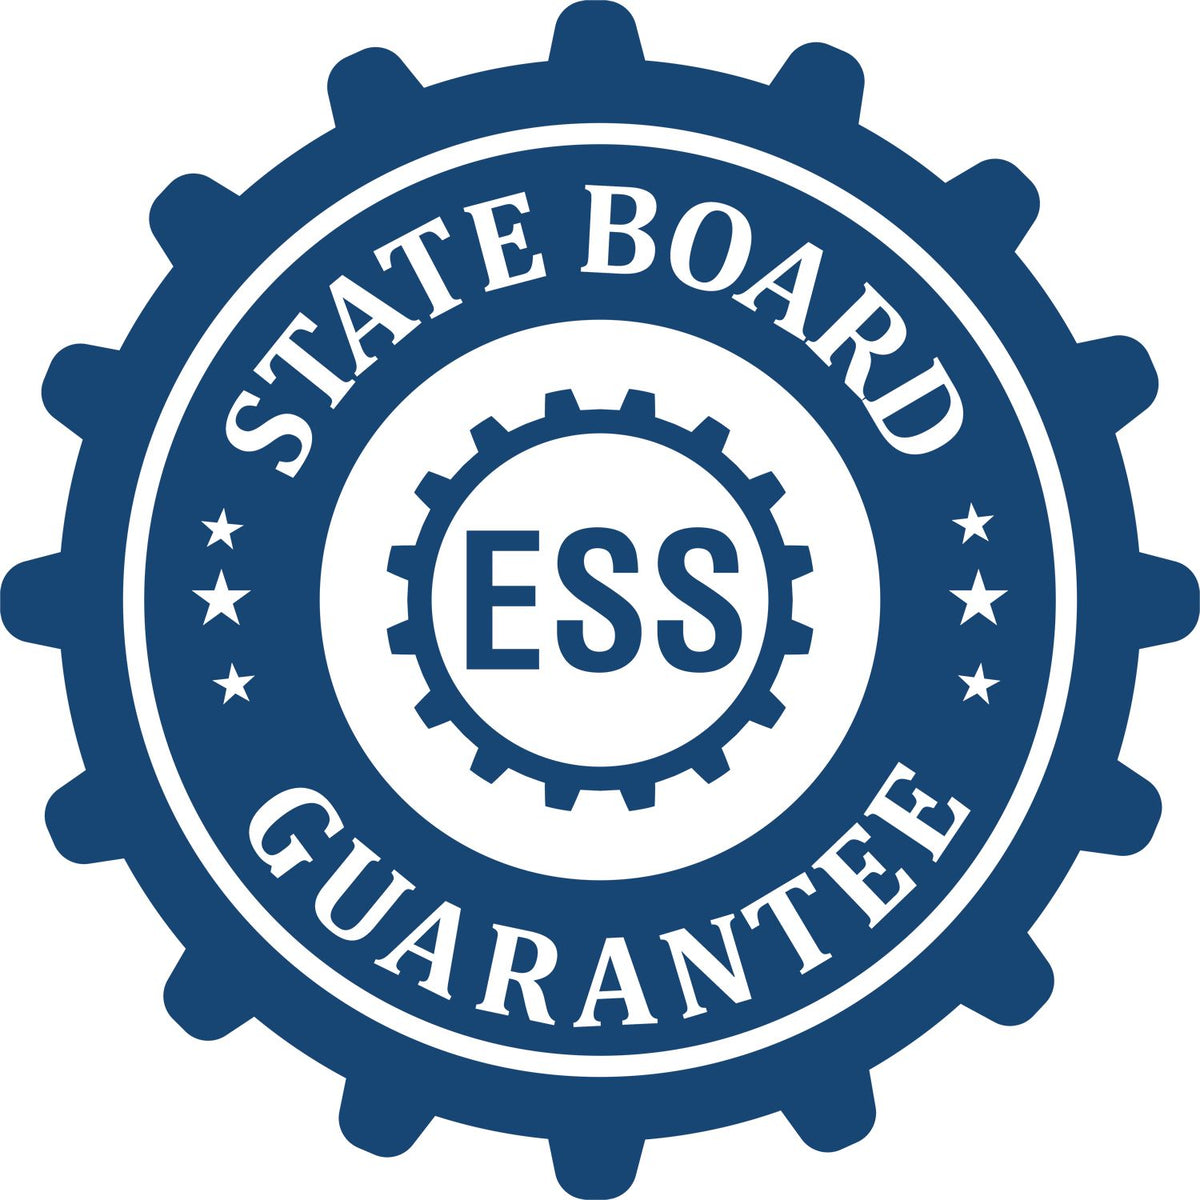 An emblem in a gear shape illustrating a state board guarantee for the Soft Oklahoma Professional Engineer Seal product.